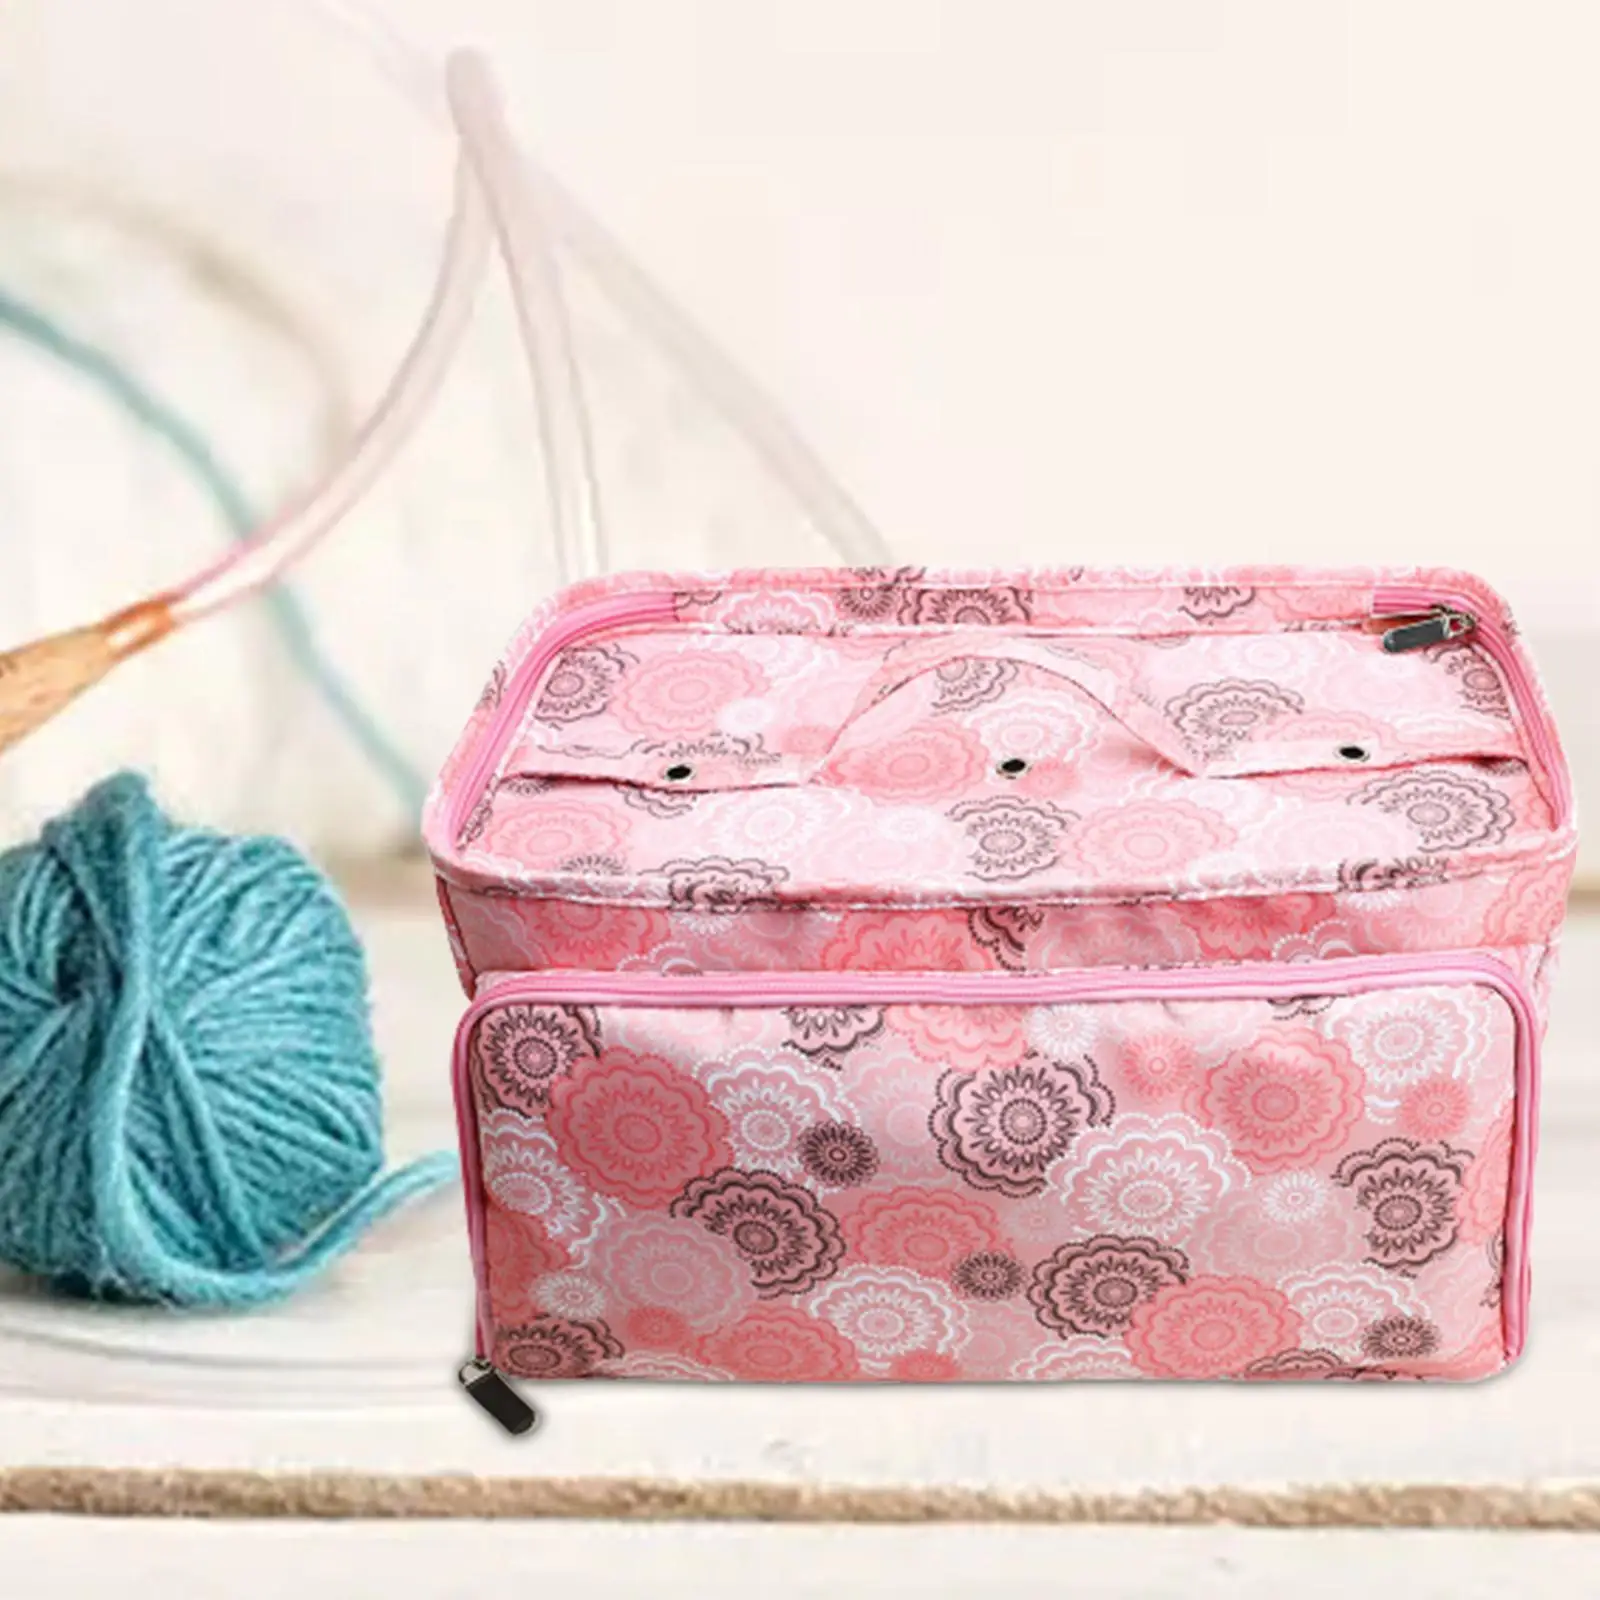 Yarn Storage Tote Bag Sewing Accessories Crochet Durable Sturdy Large Capacity with 3 Holes Multifunctional yarns Knitting Tote